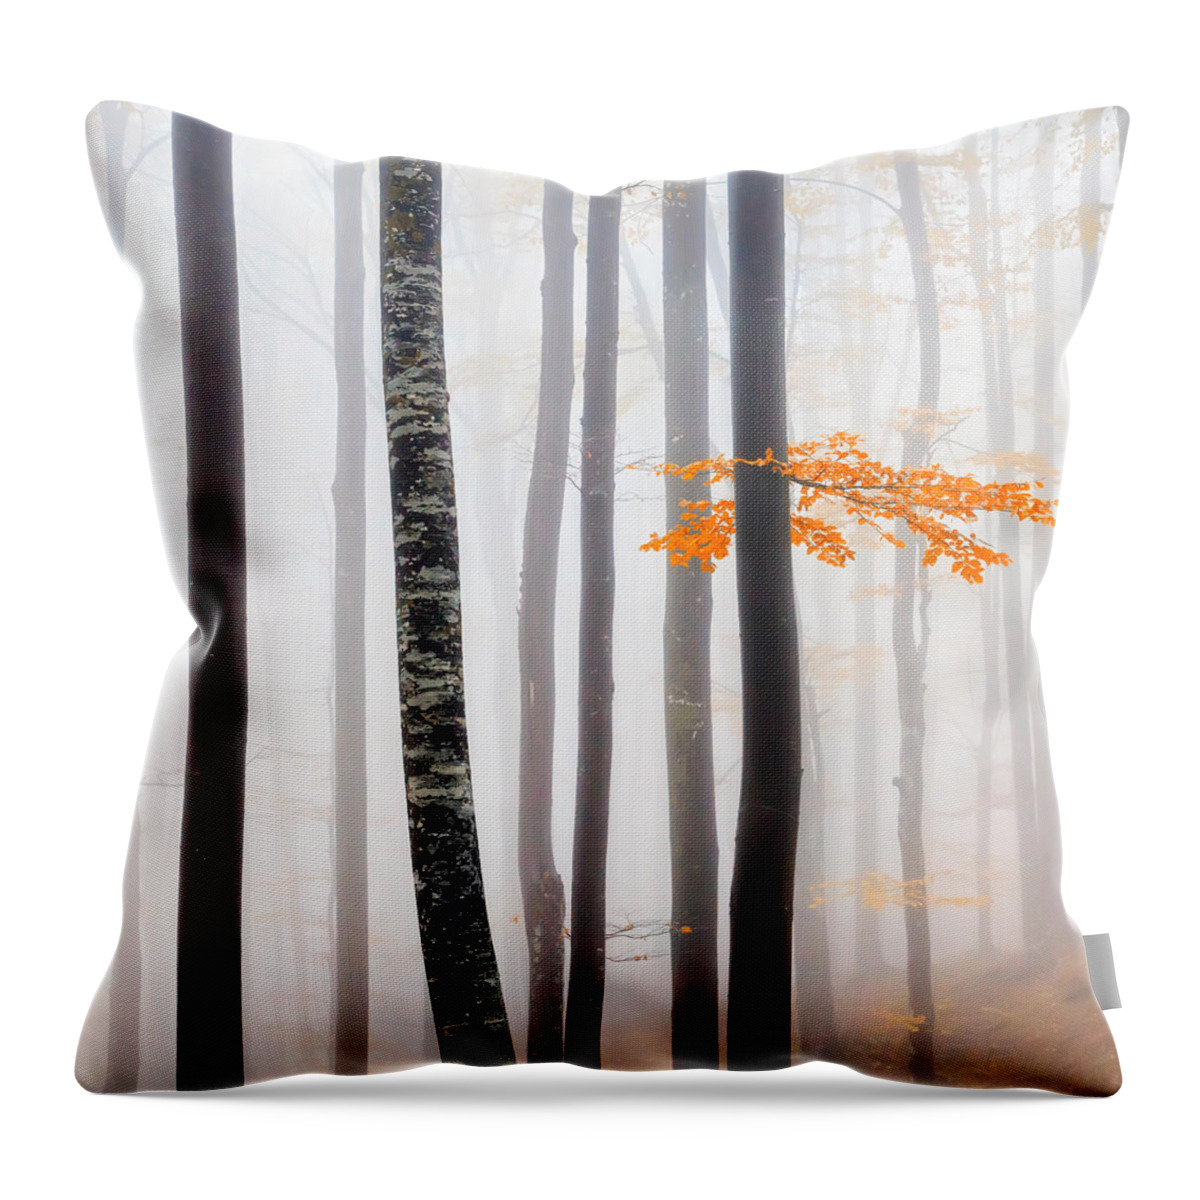 Balkan Mountains Throw Pillow featuring the photograph Delicate Forest by Evgeni Dinev